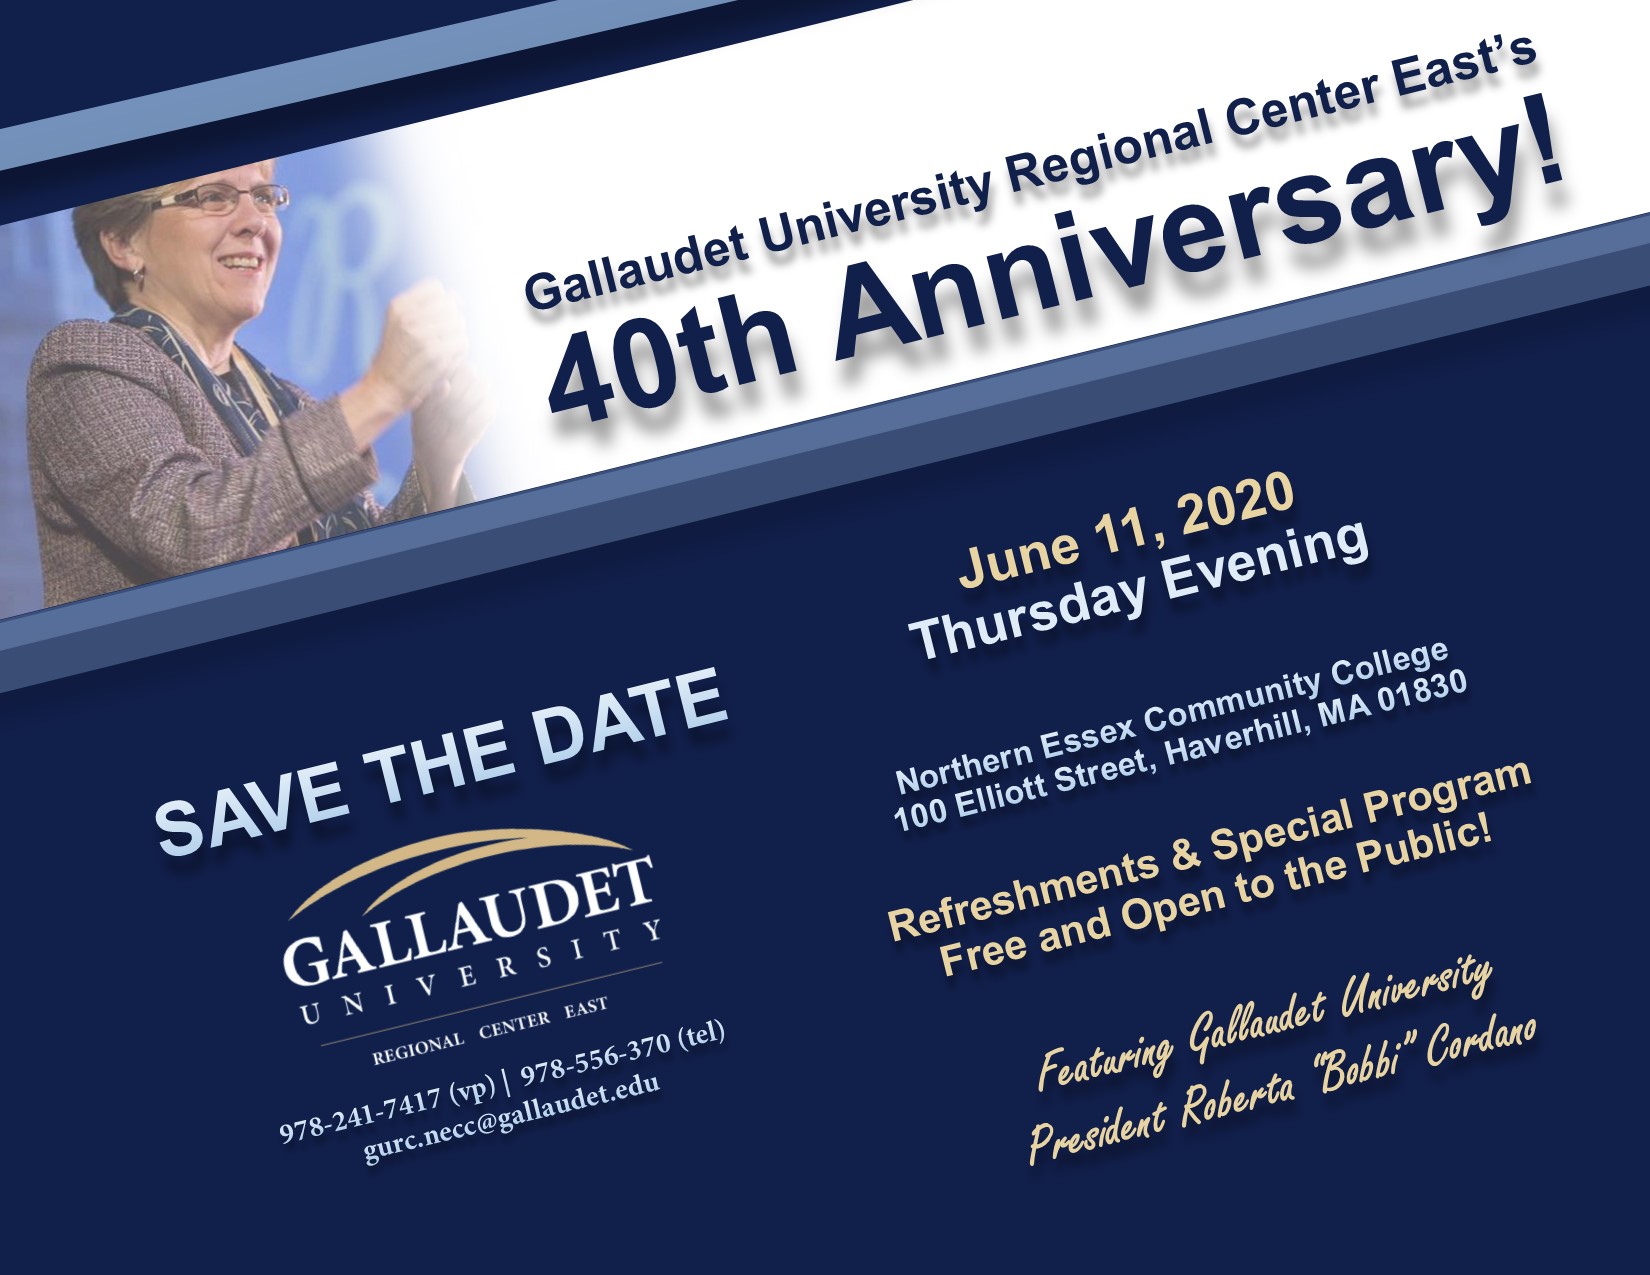 GURC East 40th Anniversary Save the date announcement 2020